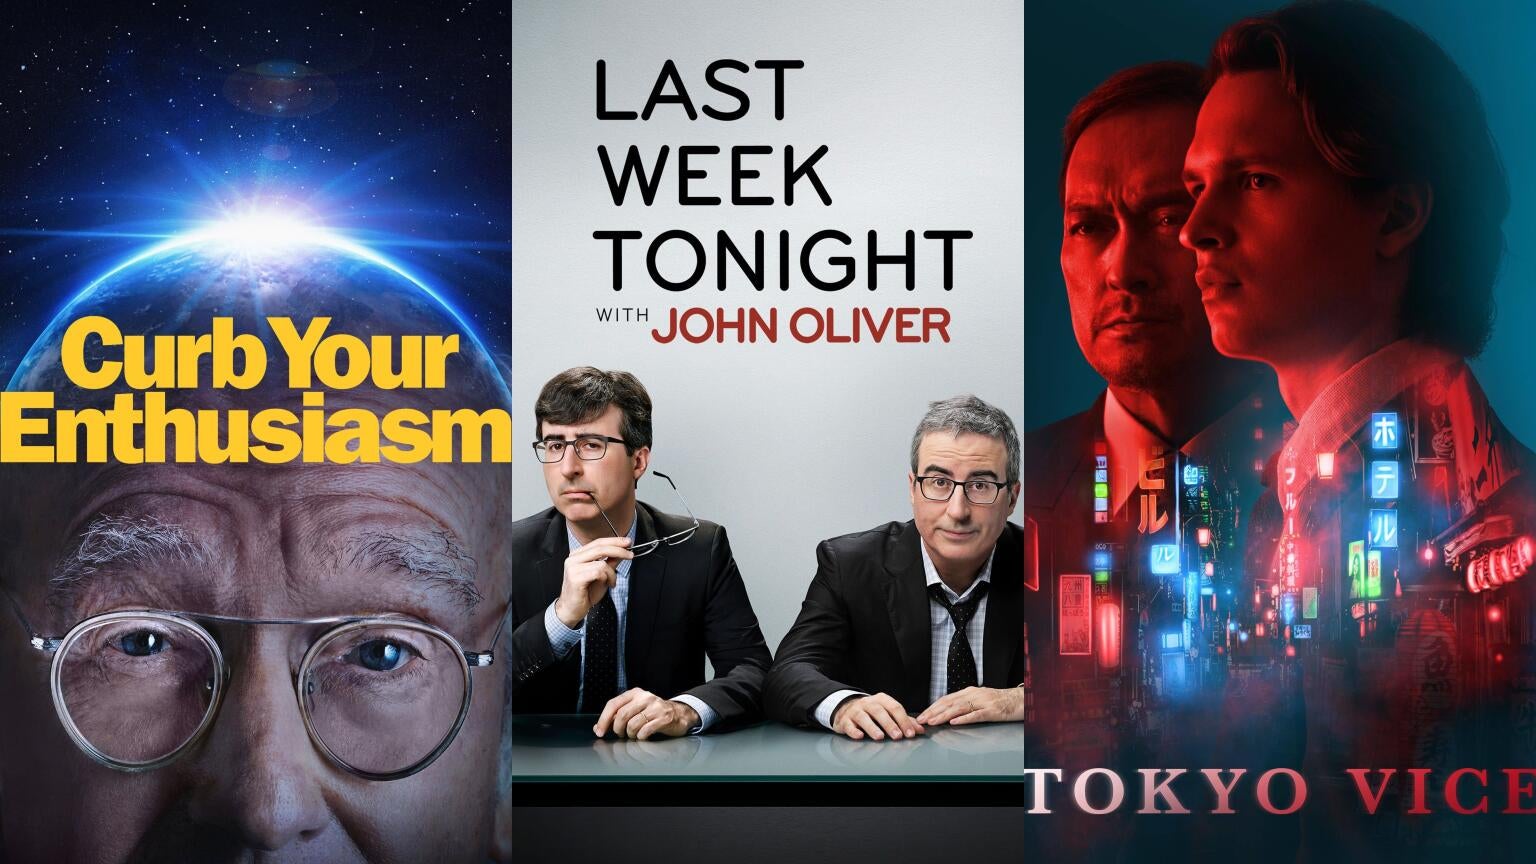 Posters for three HBO and Max series: "Curb Your Enthusiasm," "Last Week Tonight with John Oliver," and "Tokyo Vice"